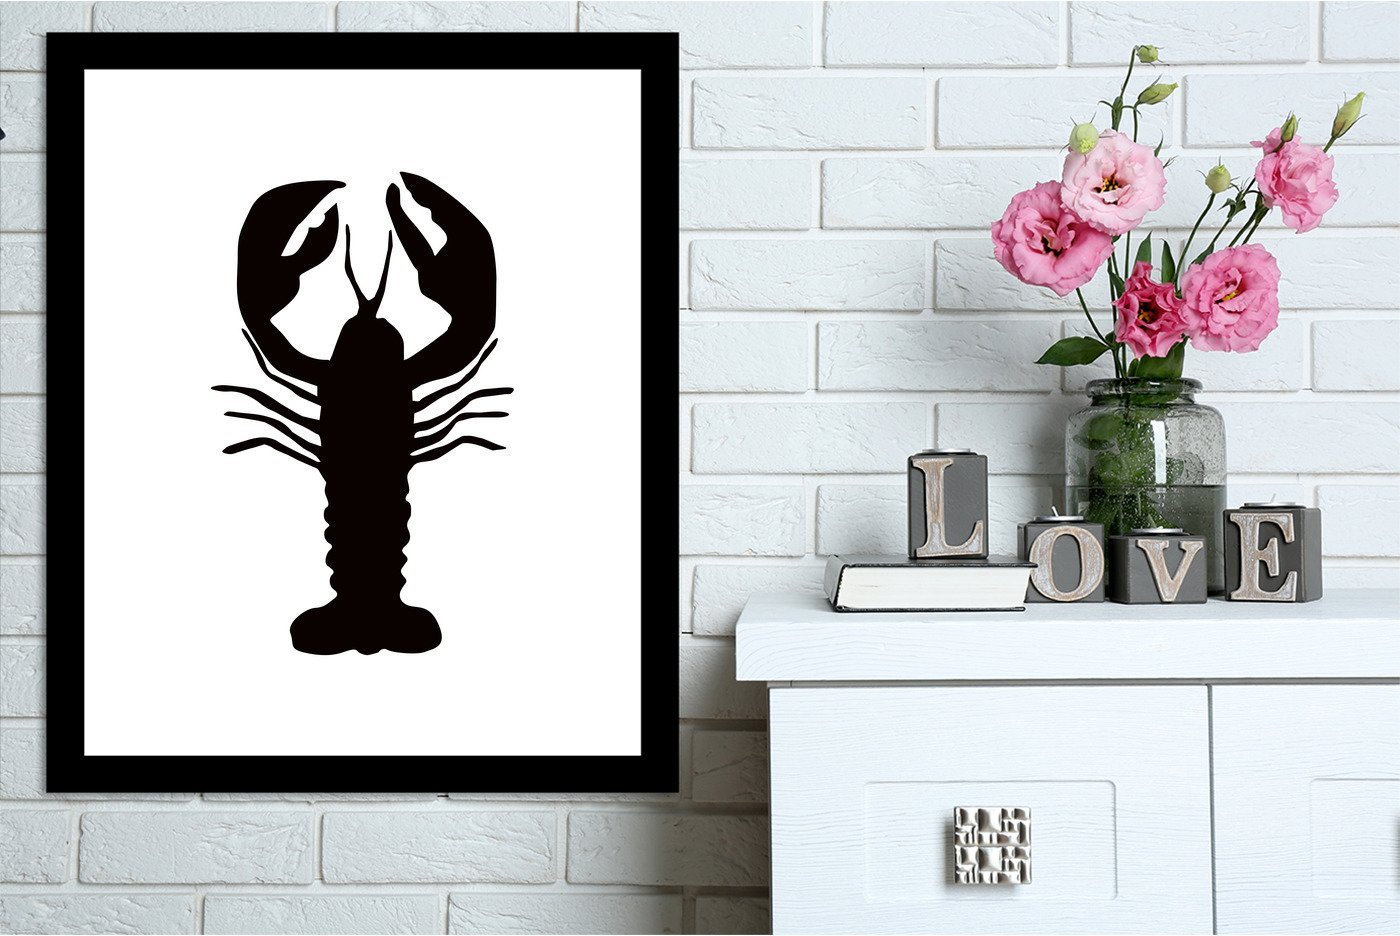 Black Lobster by Jetty Printables Framed Print - Americanflat